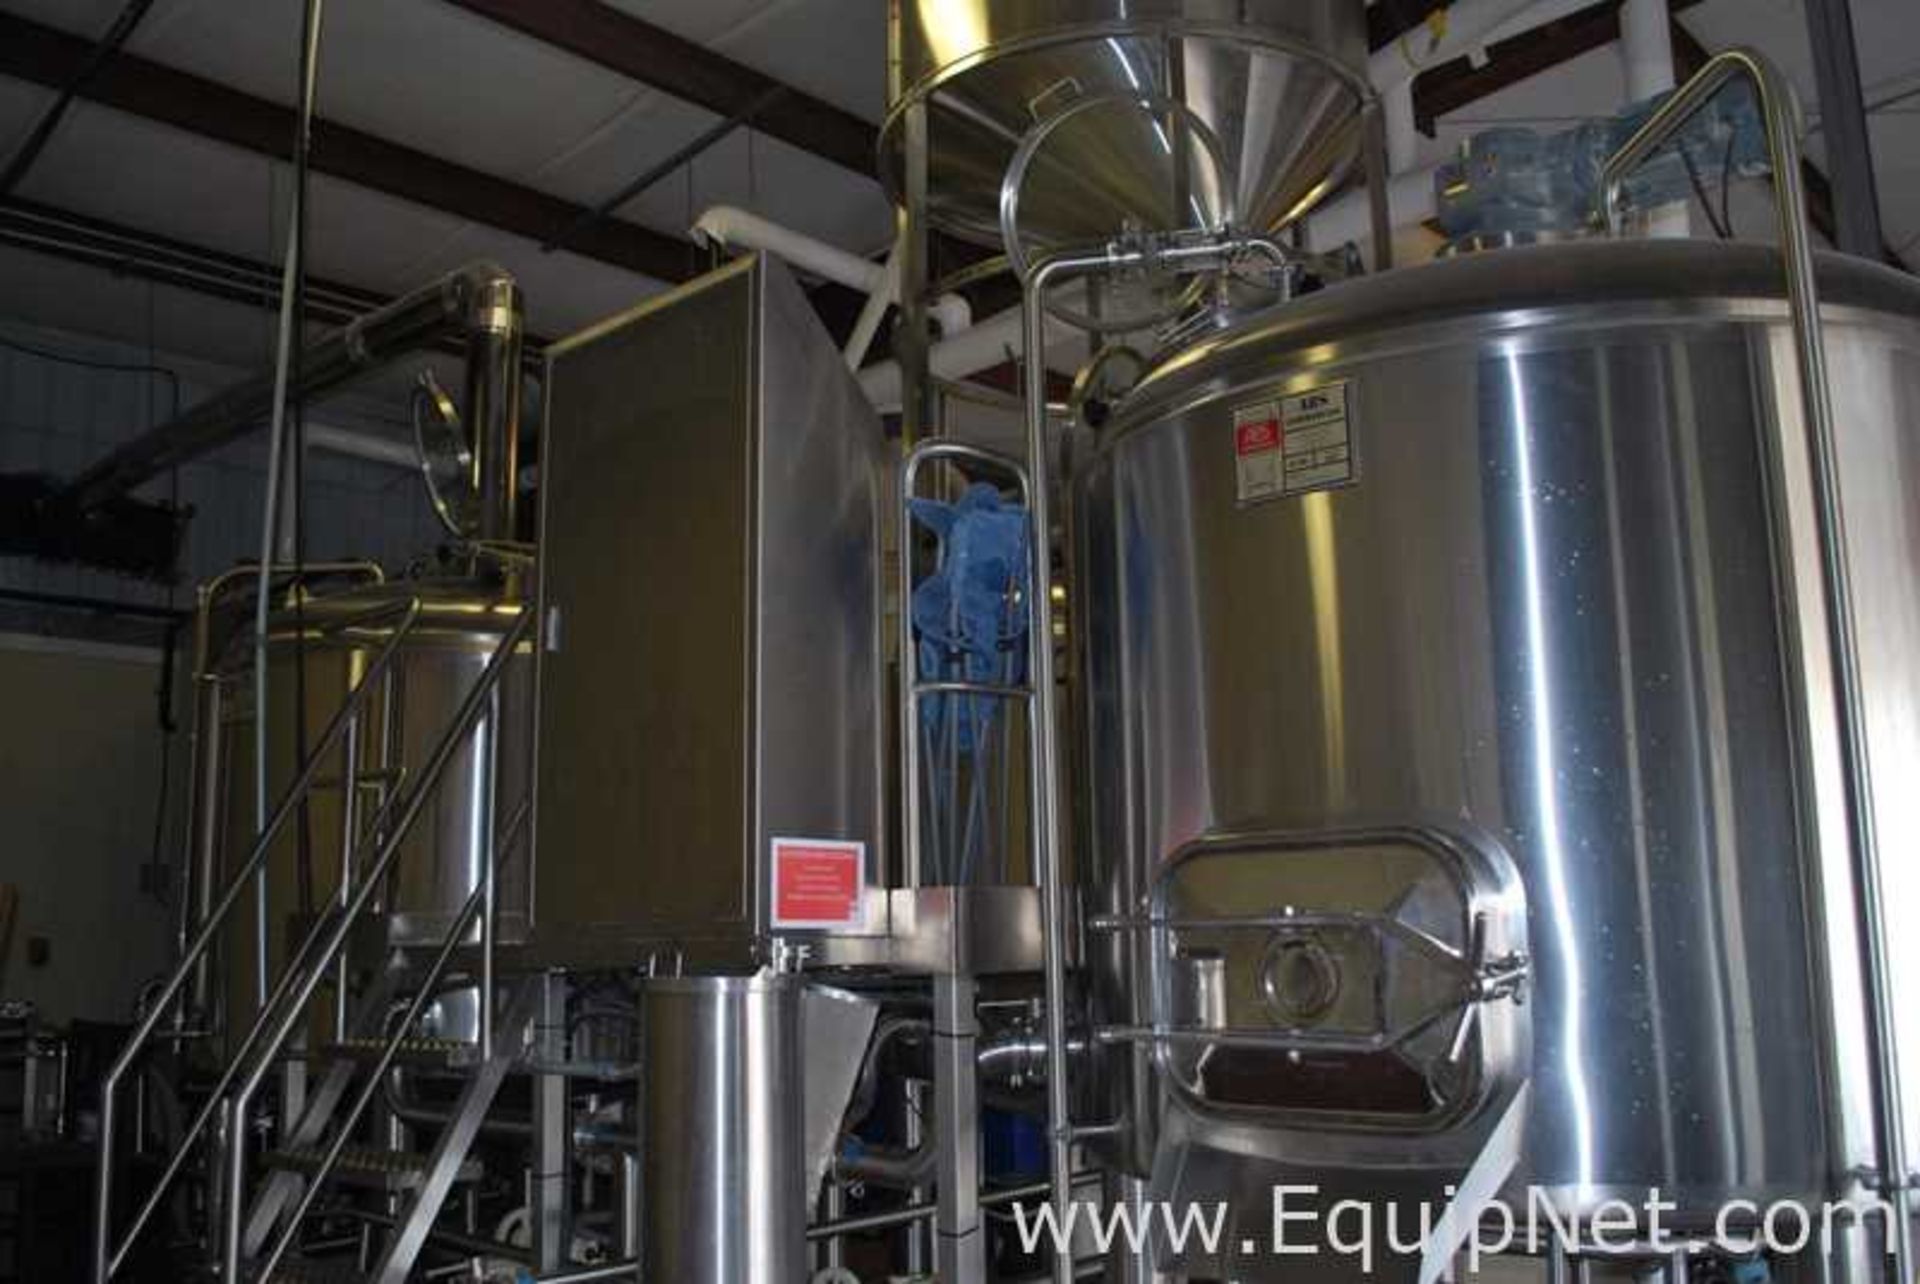 Brew House Sytem with Three- 20 BBL Vessels Mash Tun|Lauter Tun|Whirlpool-Boil Kettle